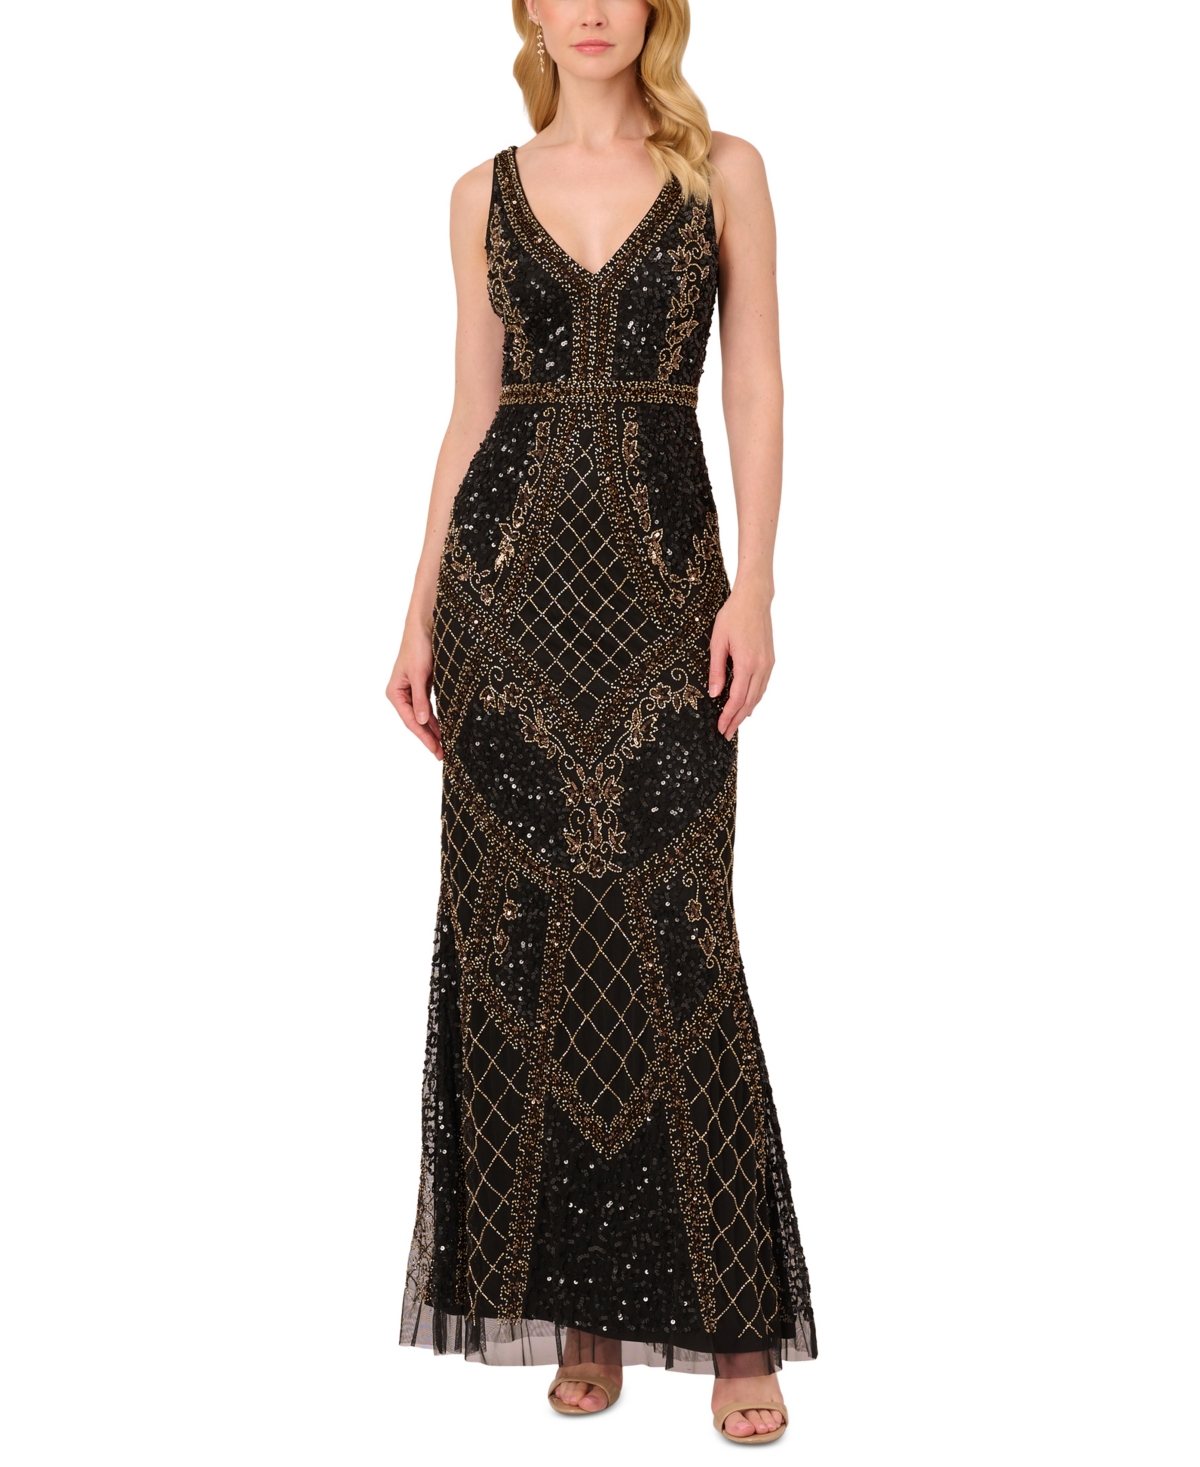 Downton Abbey Inspired Dresses Adrianna Papell Womens Beaded Mesh Column Gown - Black Gold $349.00 AT vintagedancer.com